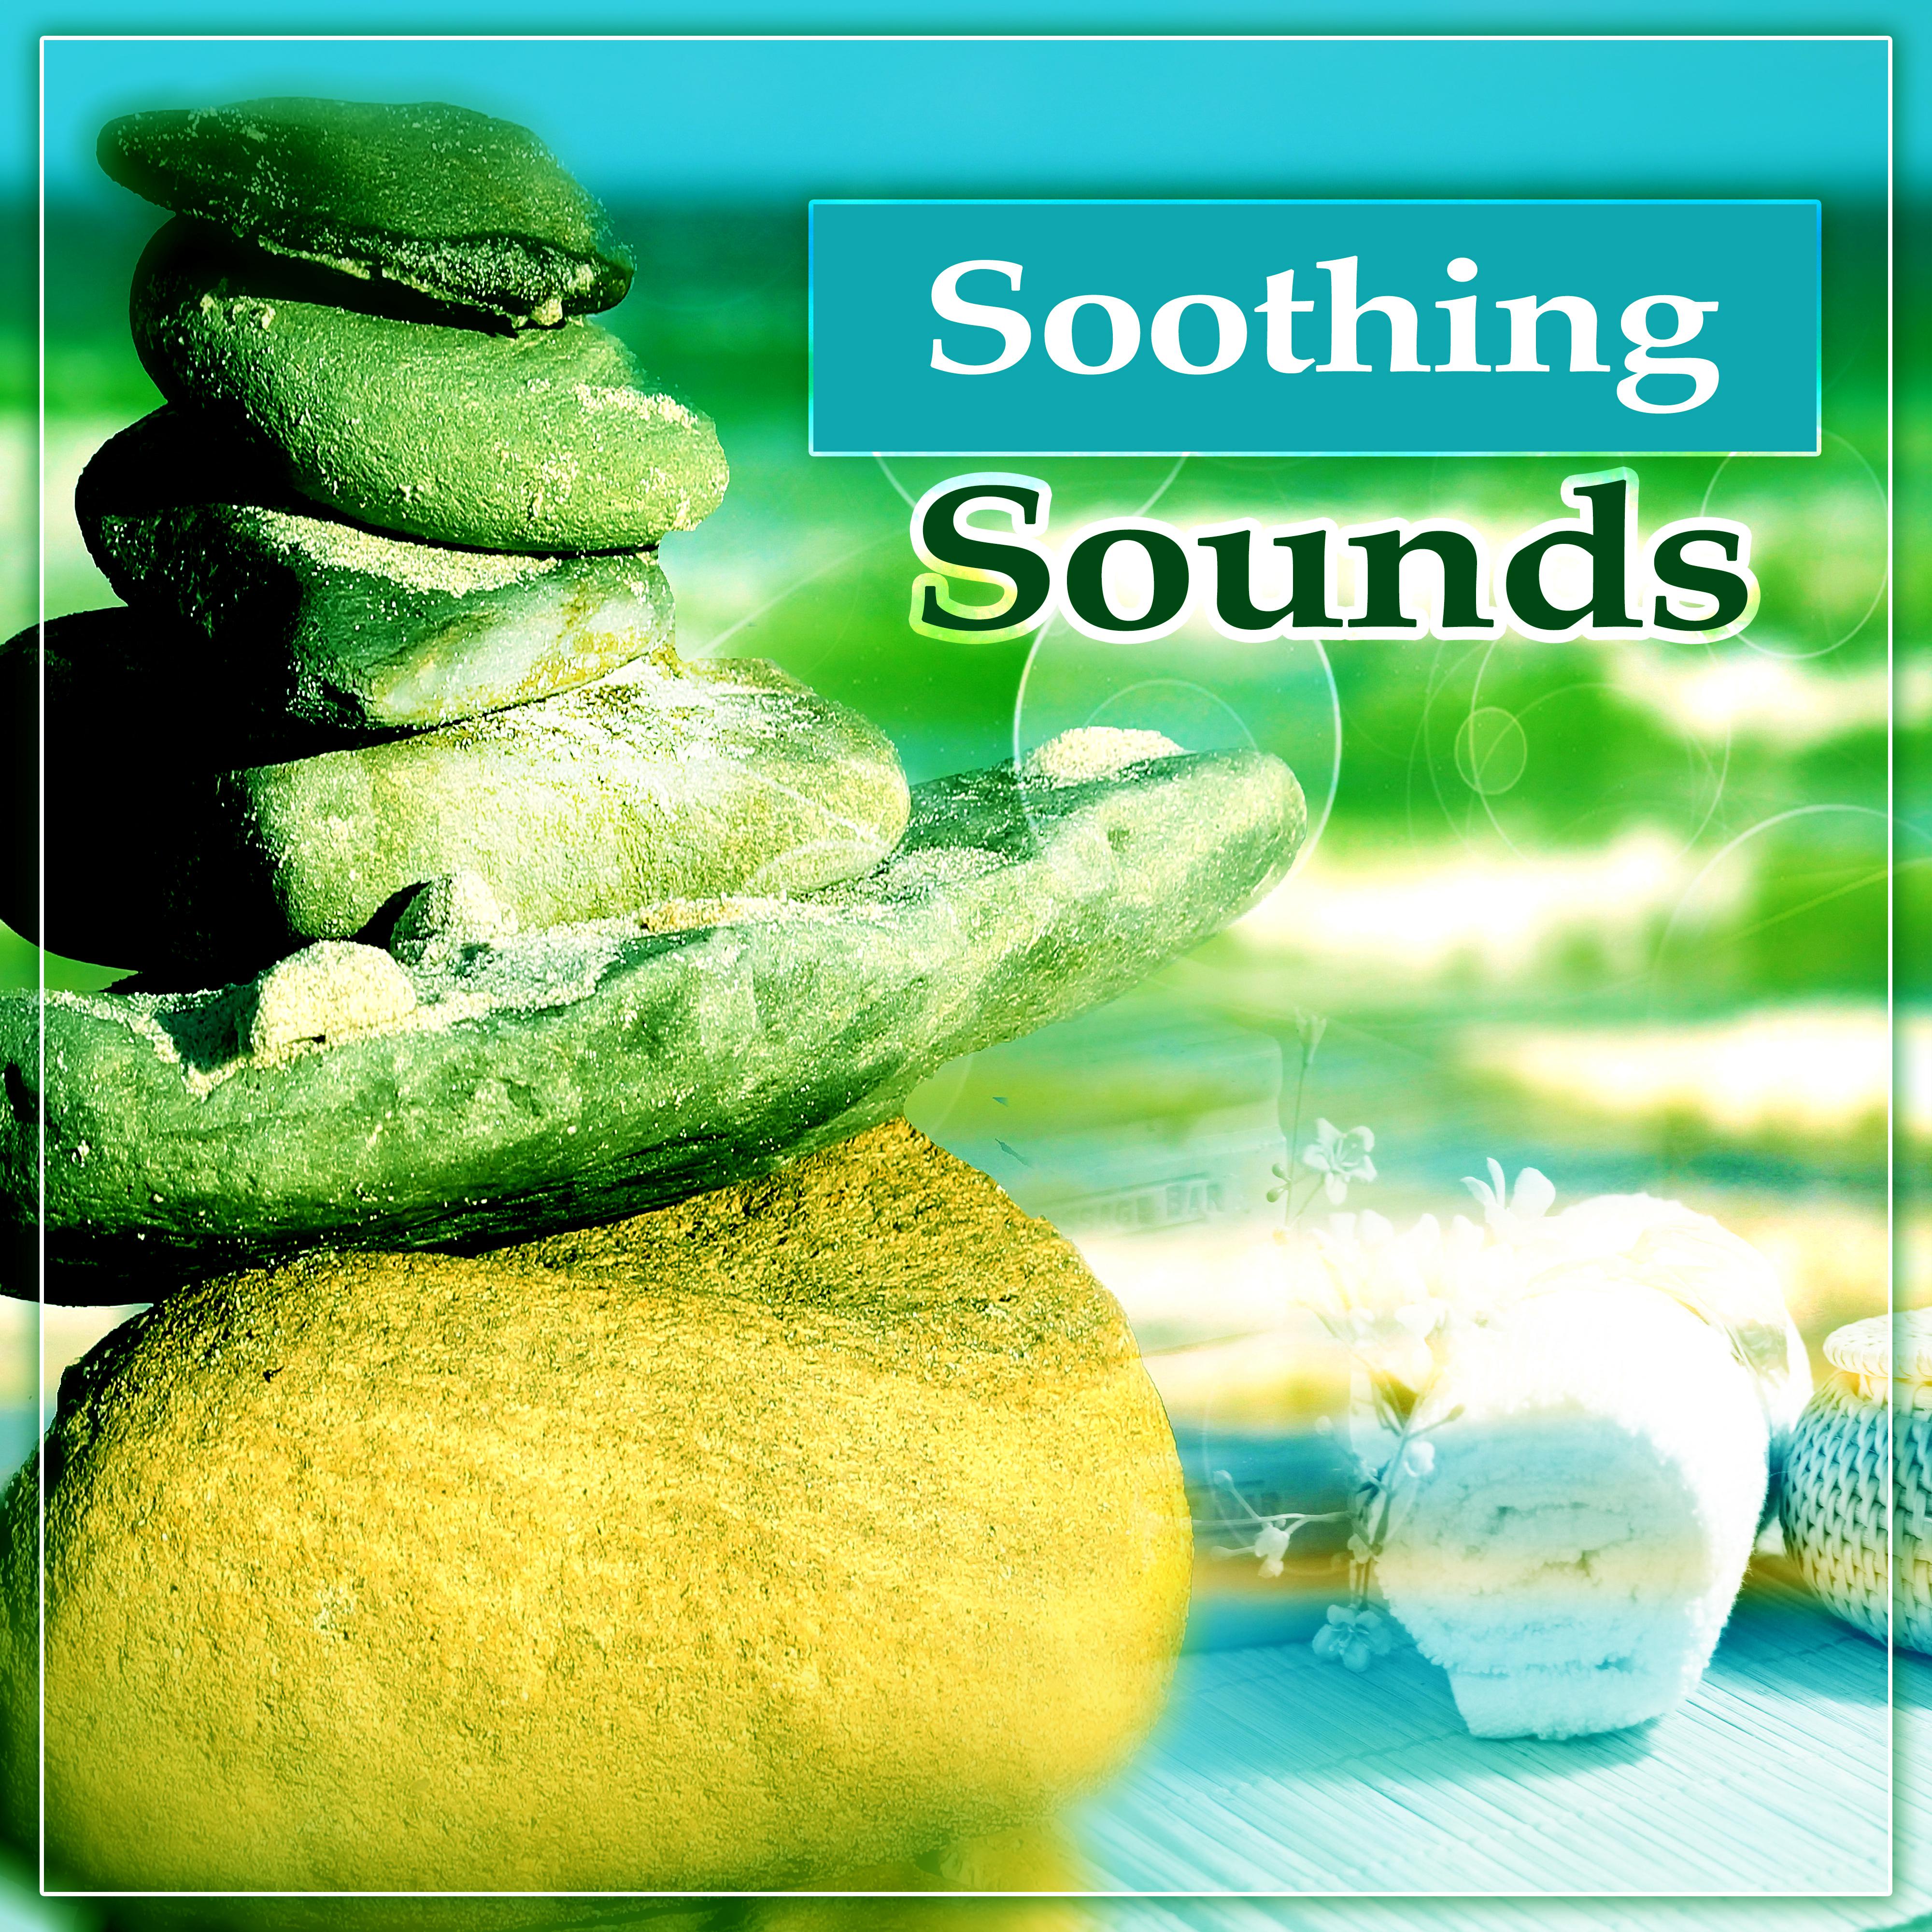 Soothing Sounds  Music for Spa and Wellness, Calming Sounds, Total Relax After Work